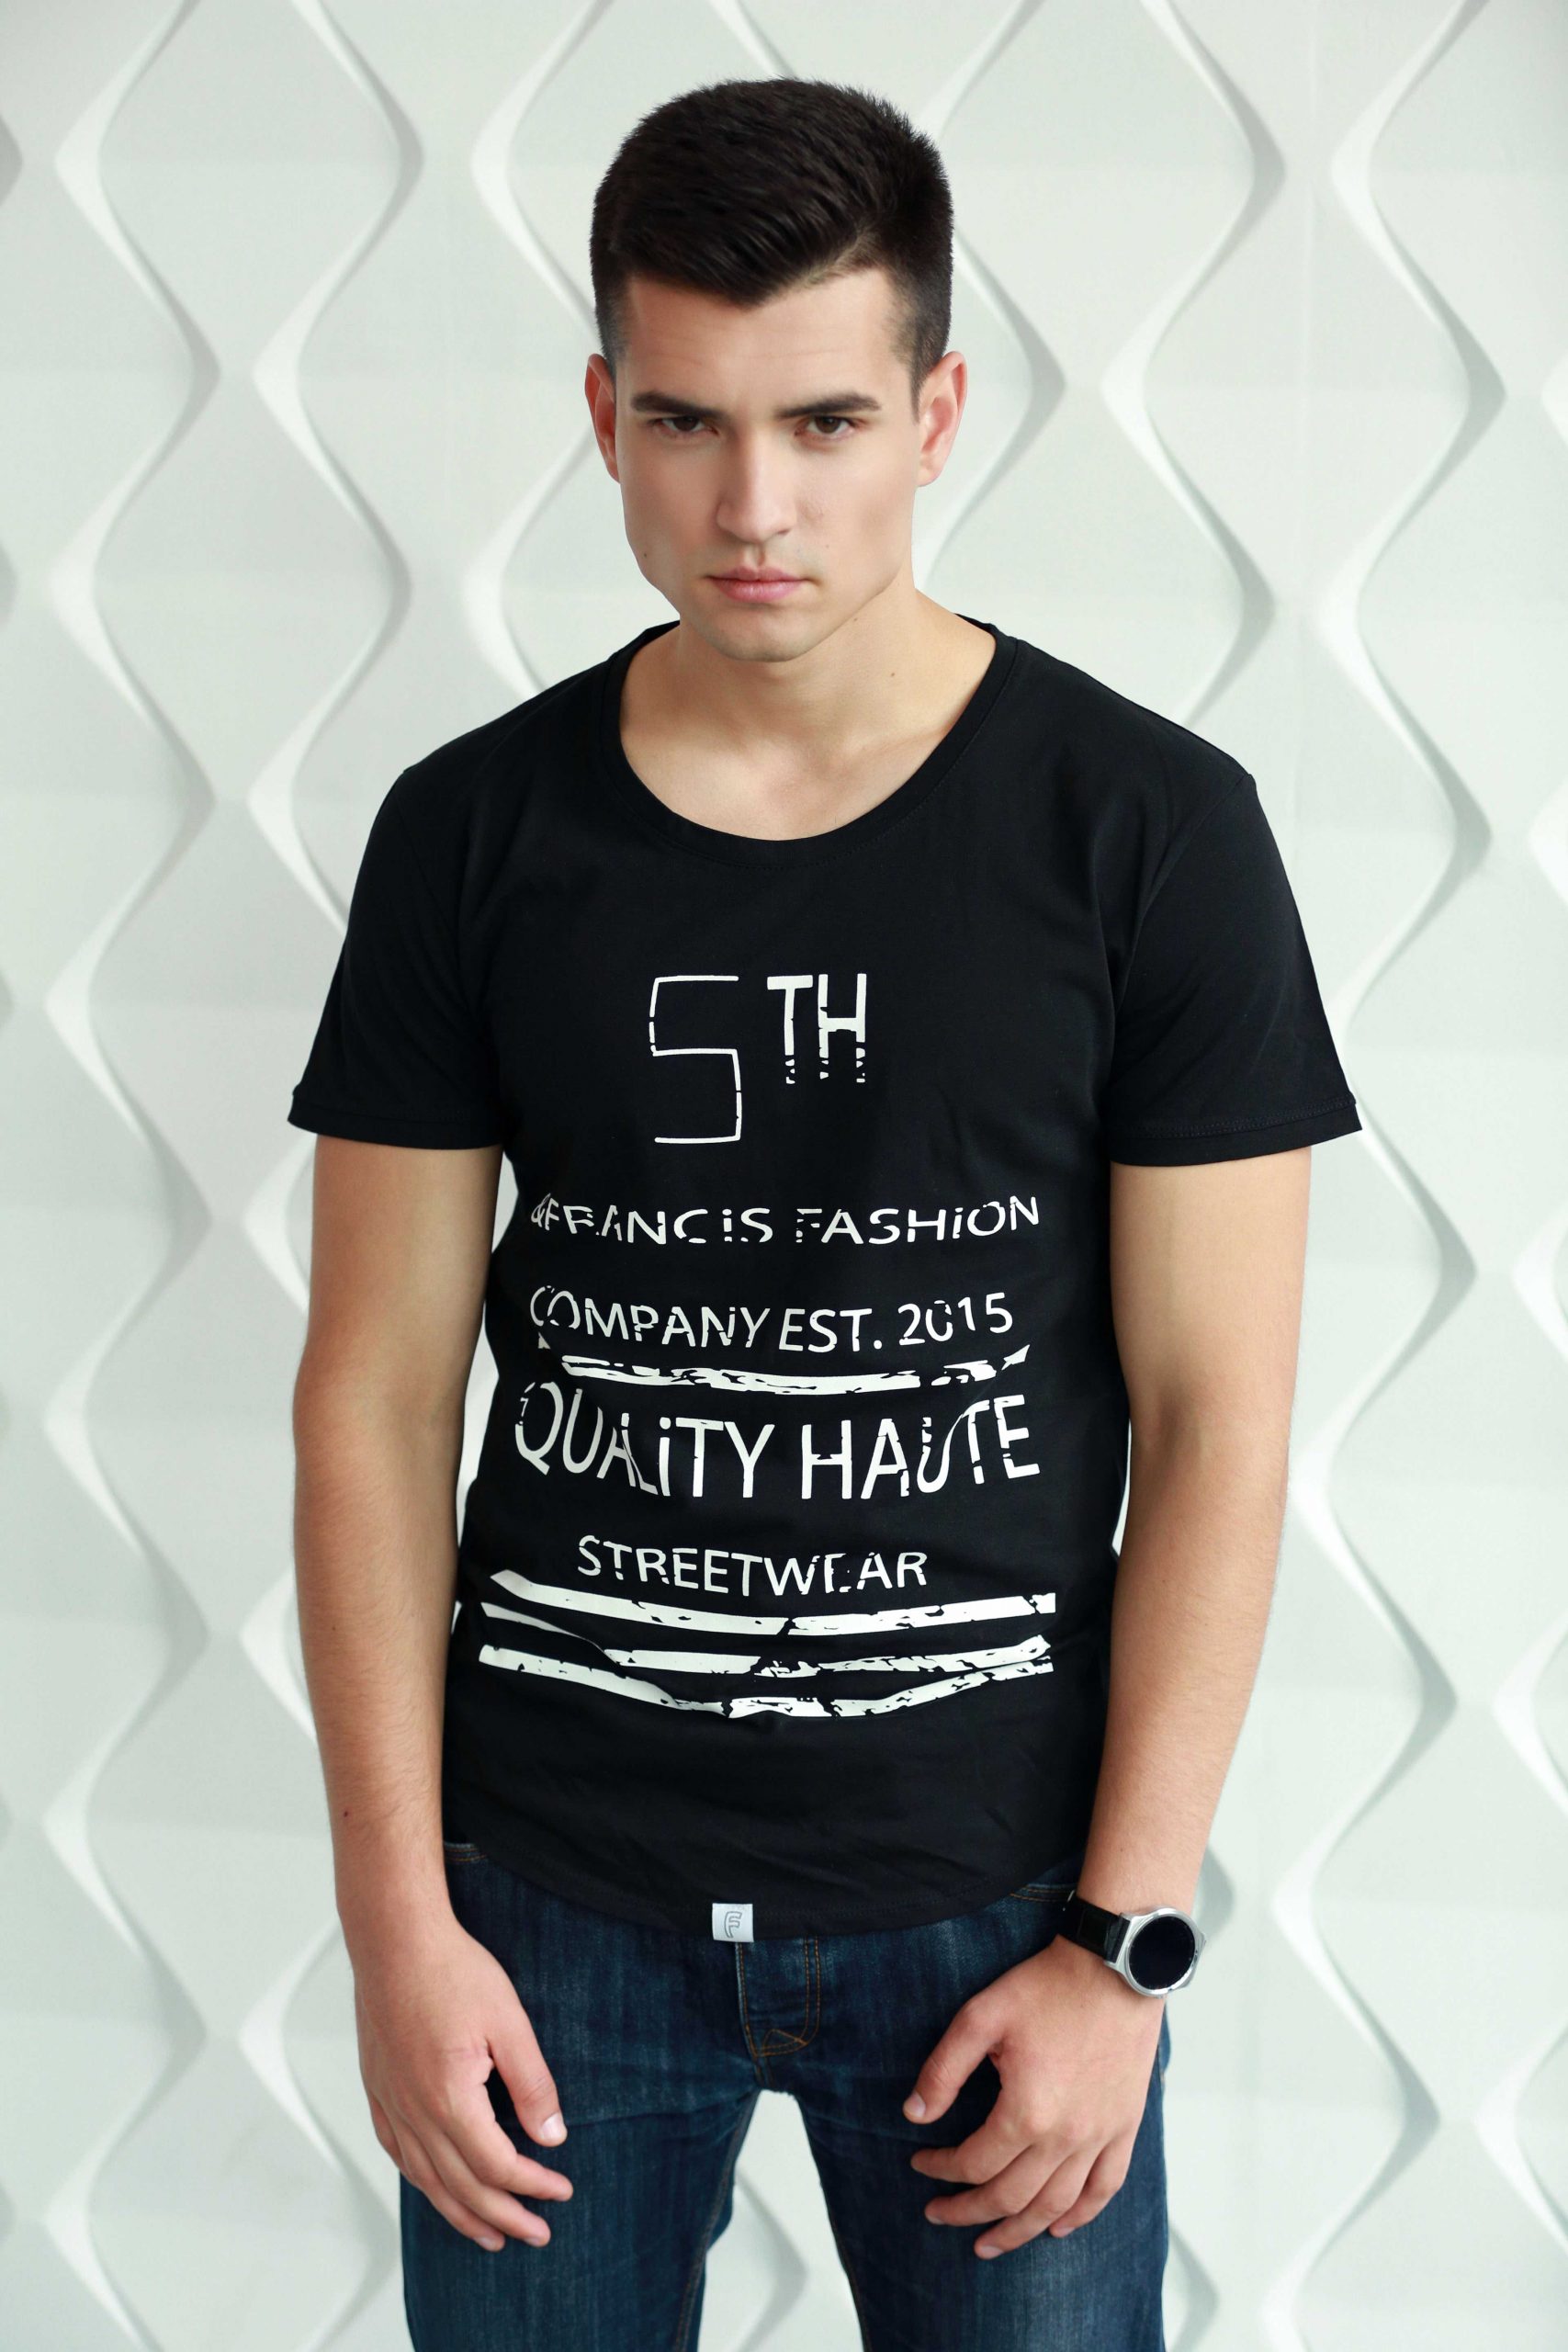 Black white T-shirt men - Fifth & Francis casual clothing for men